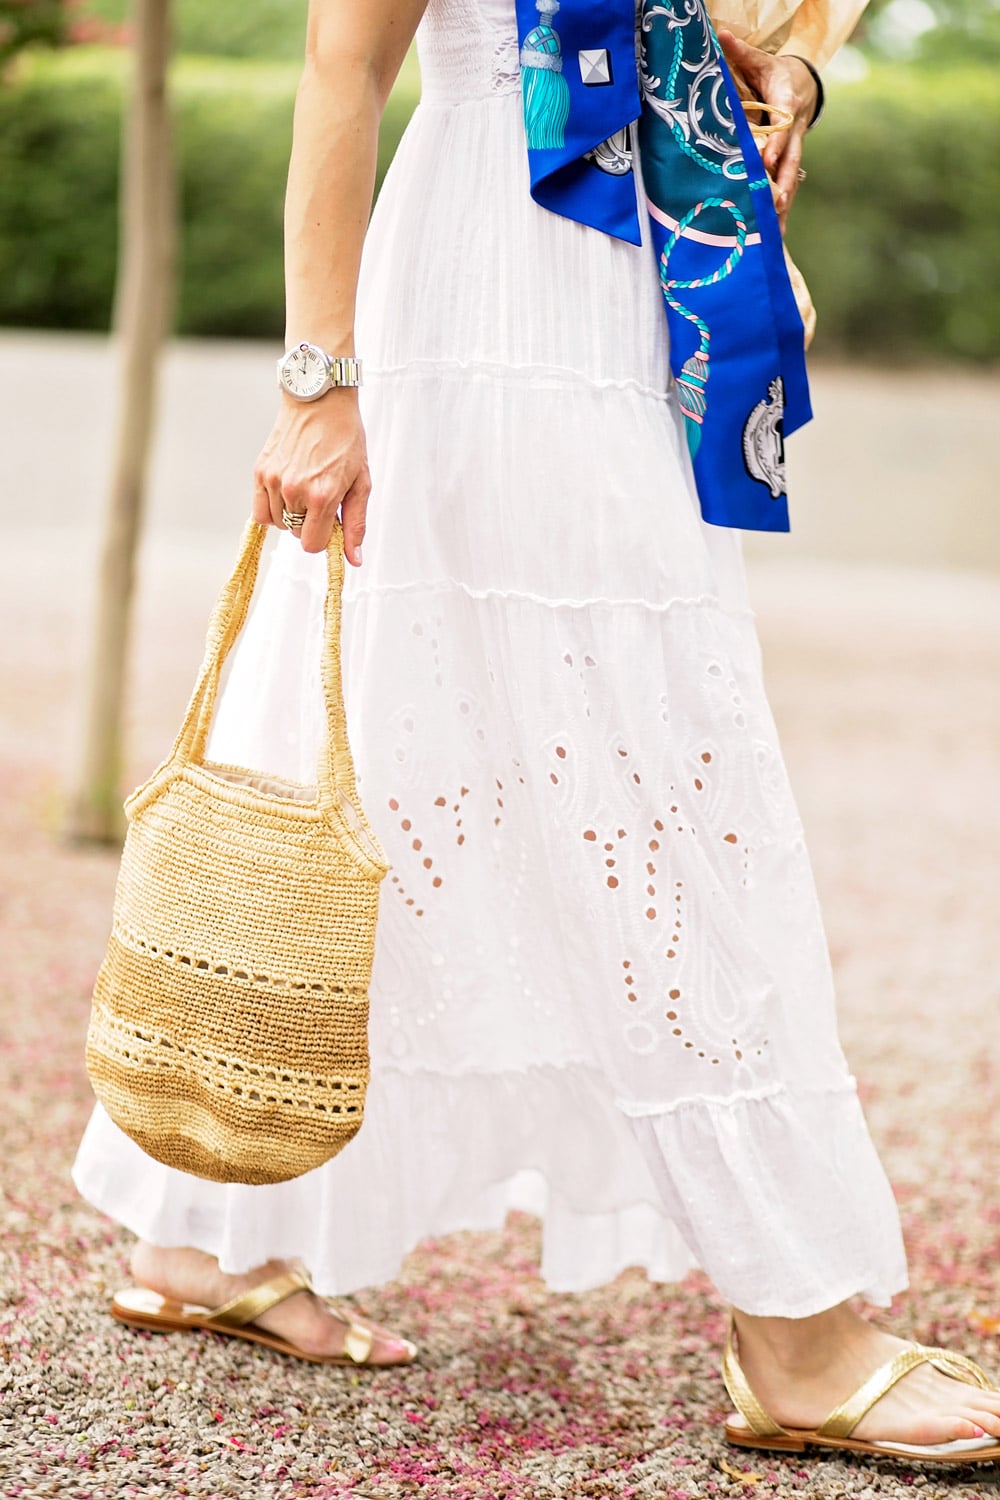 white eyelet maxi dress cocobelle l*space snake wrap sandals straw bag santorini inspired vacation outfit